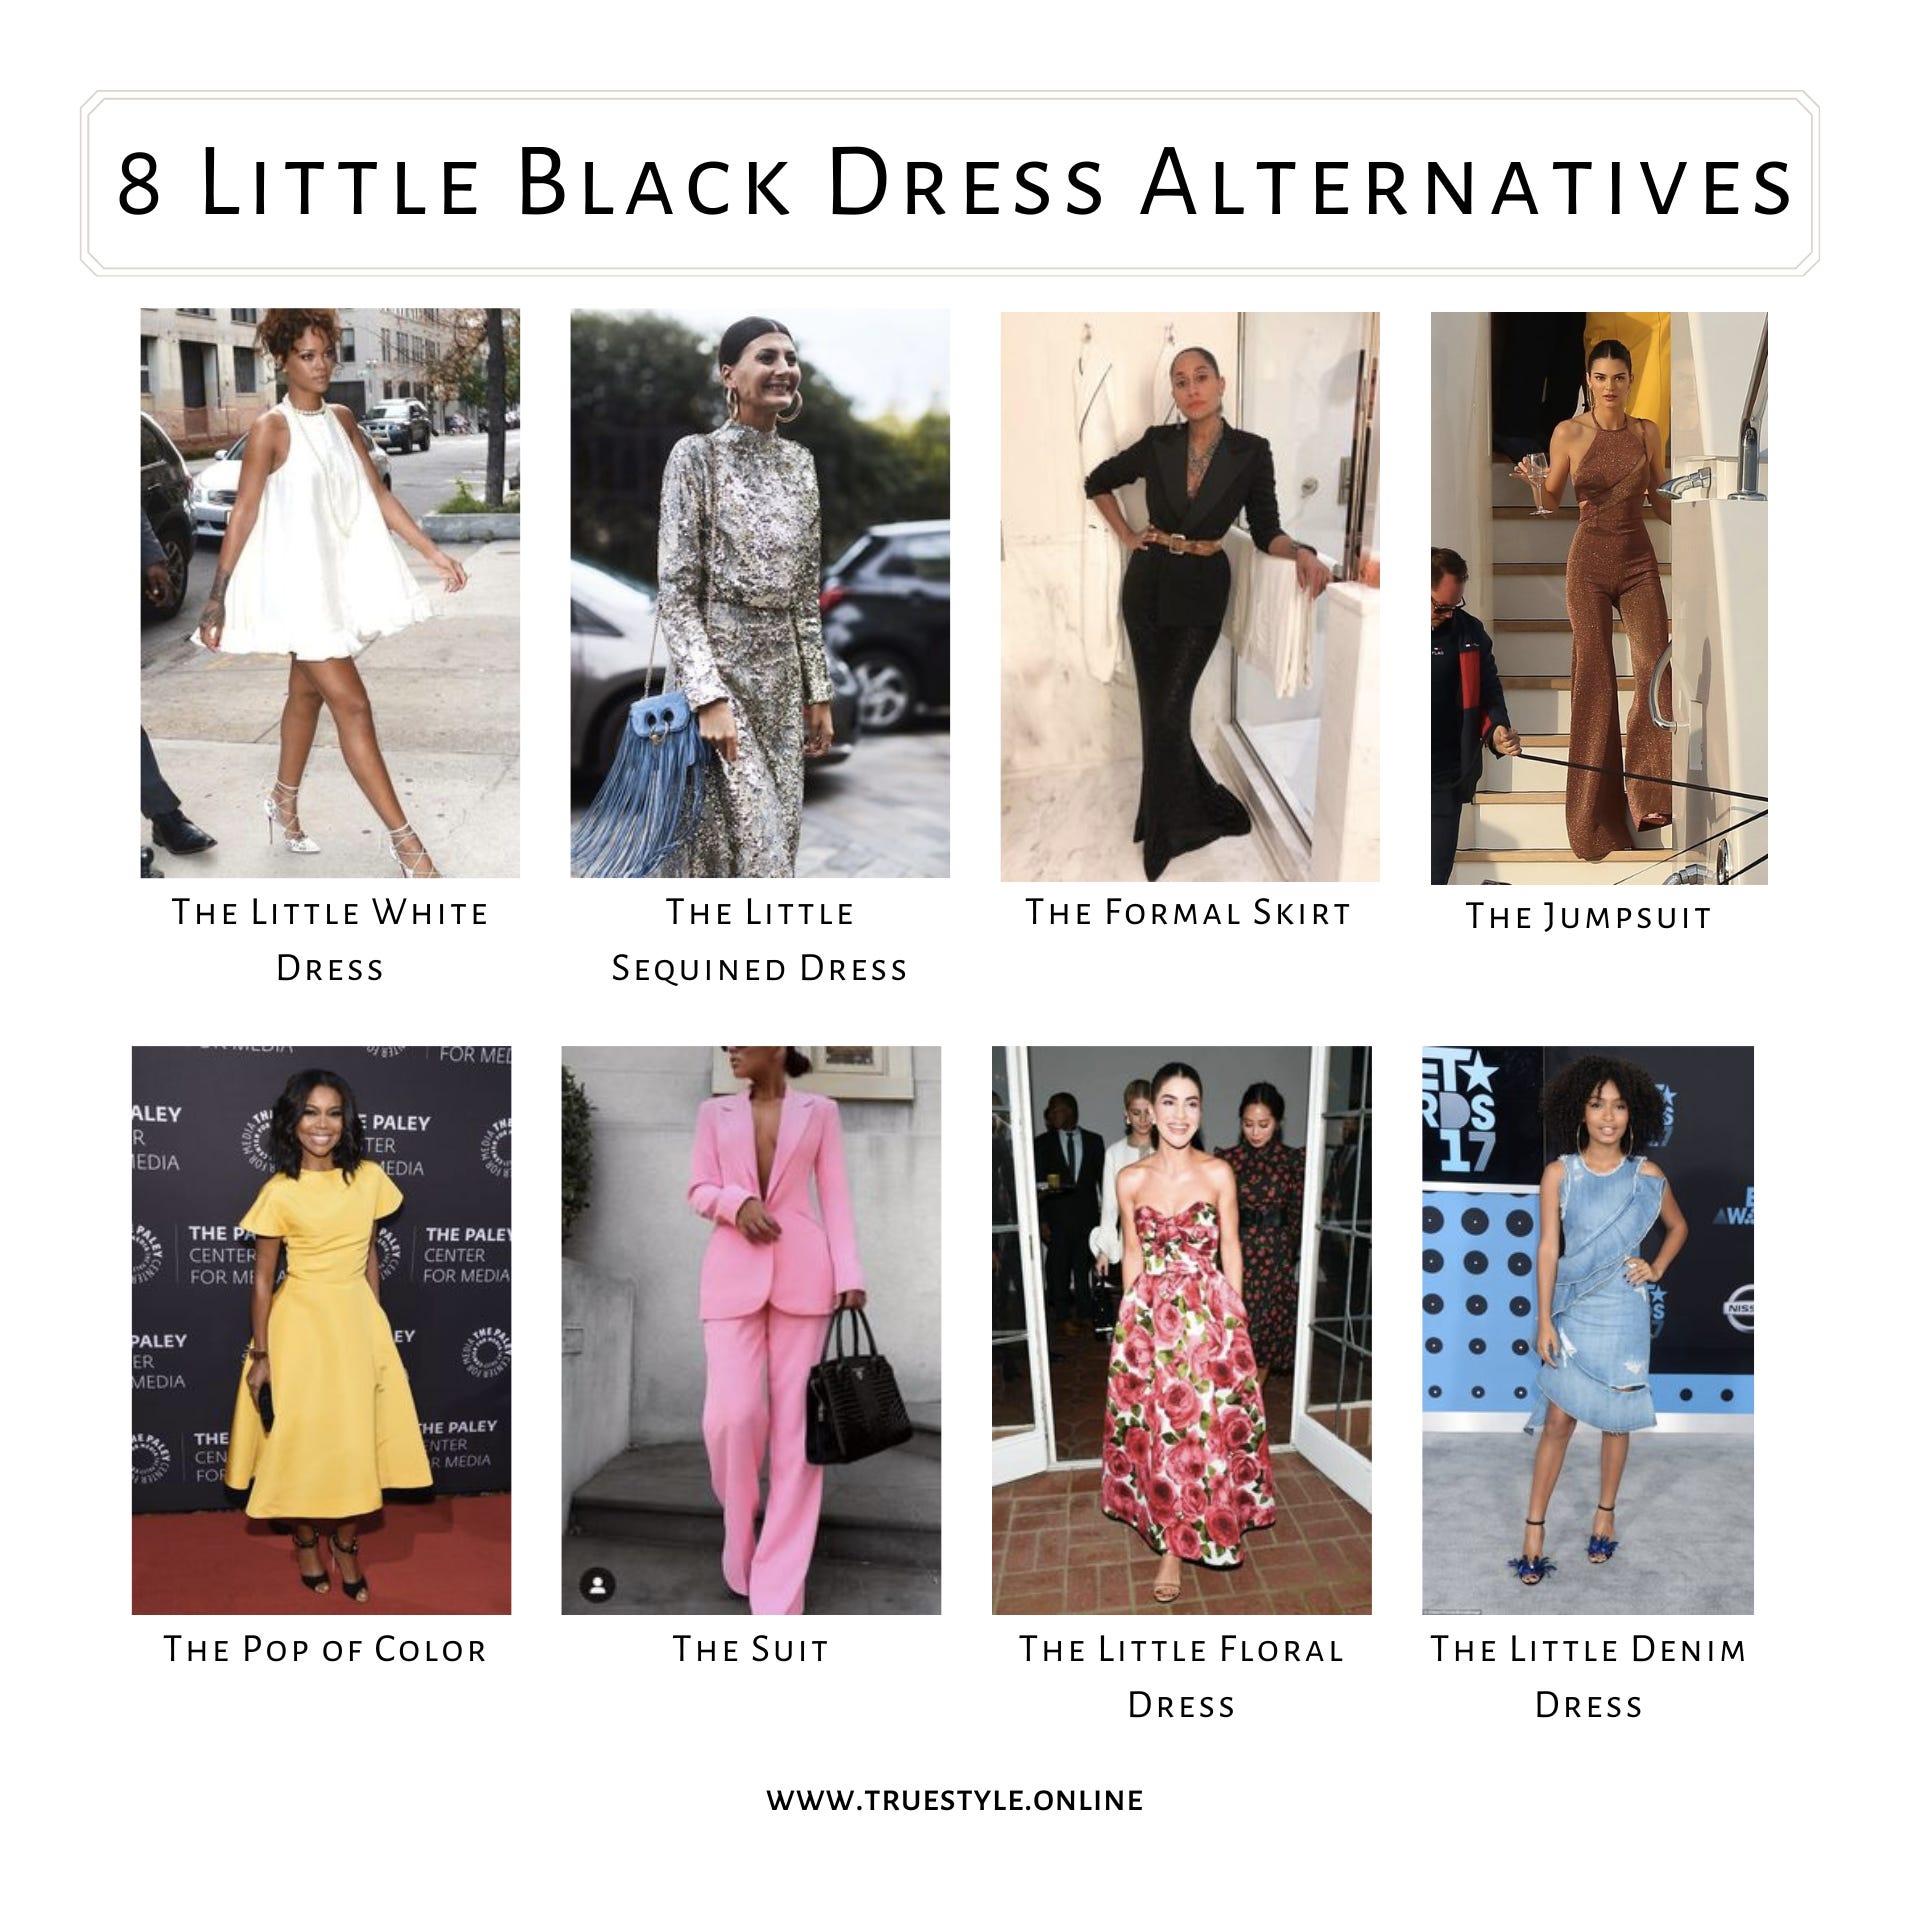 You Don't “Need” A Little Black Dress - 10 Style Rules to Break (And One to  Follow!)